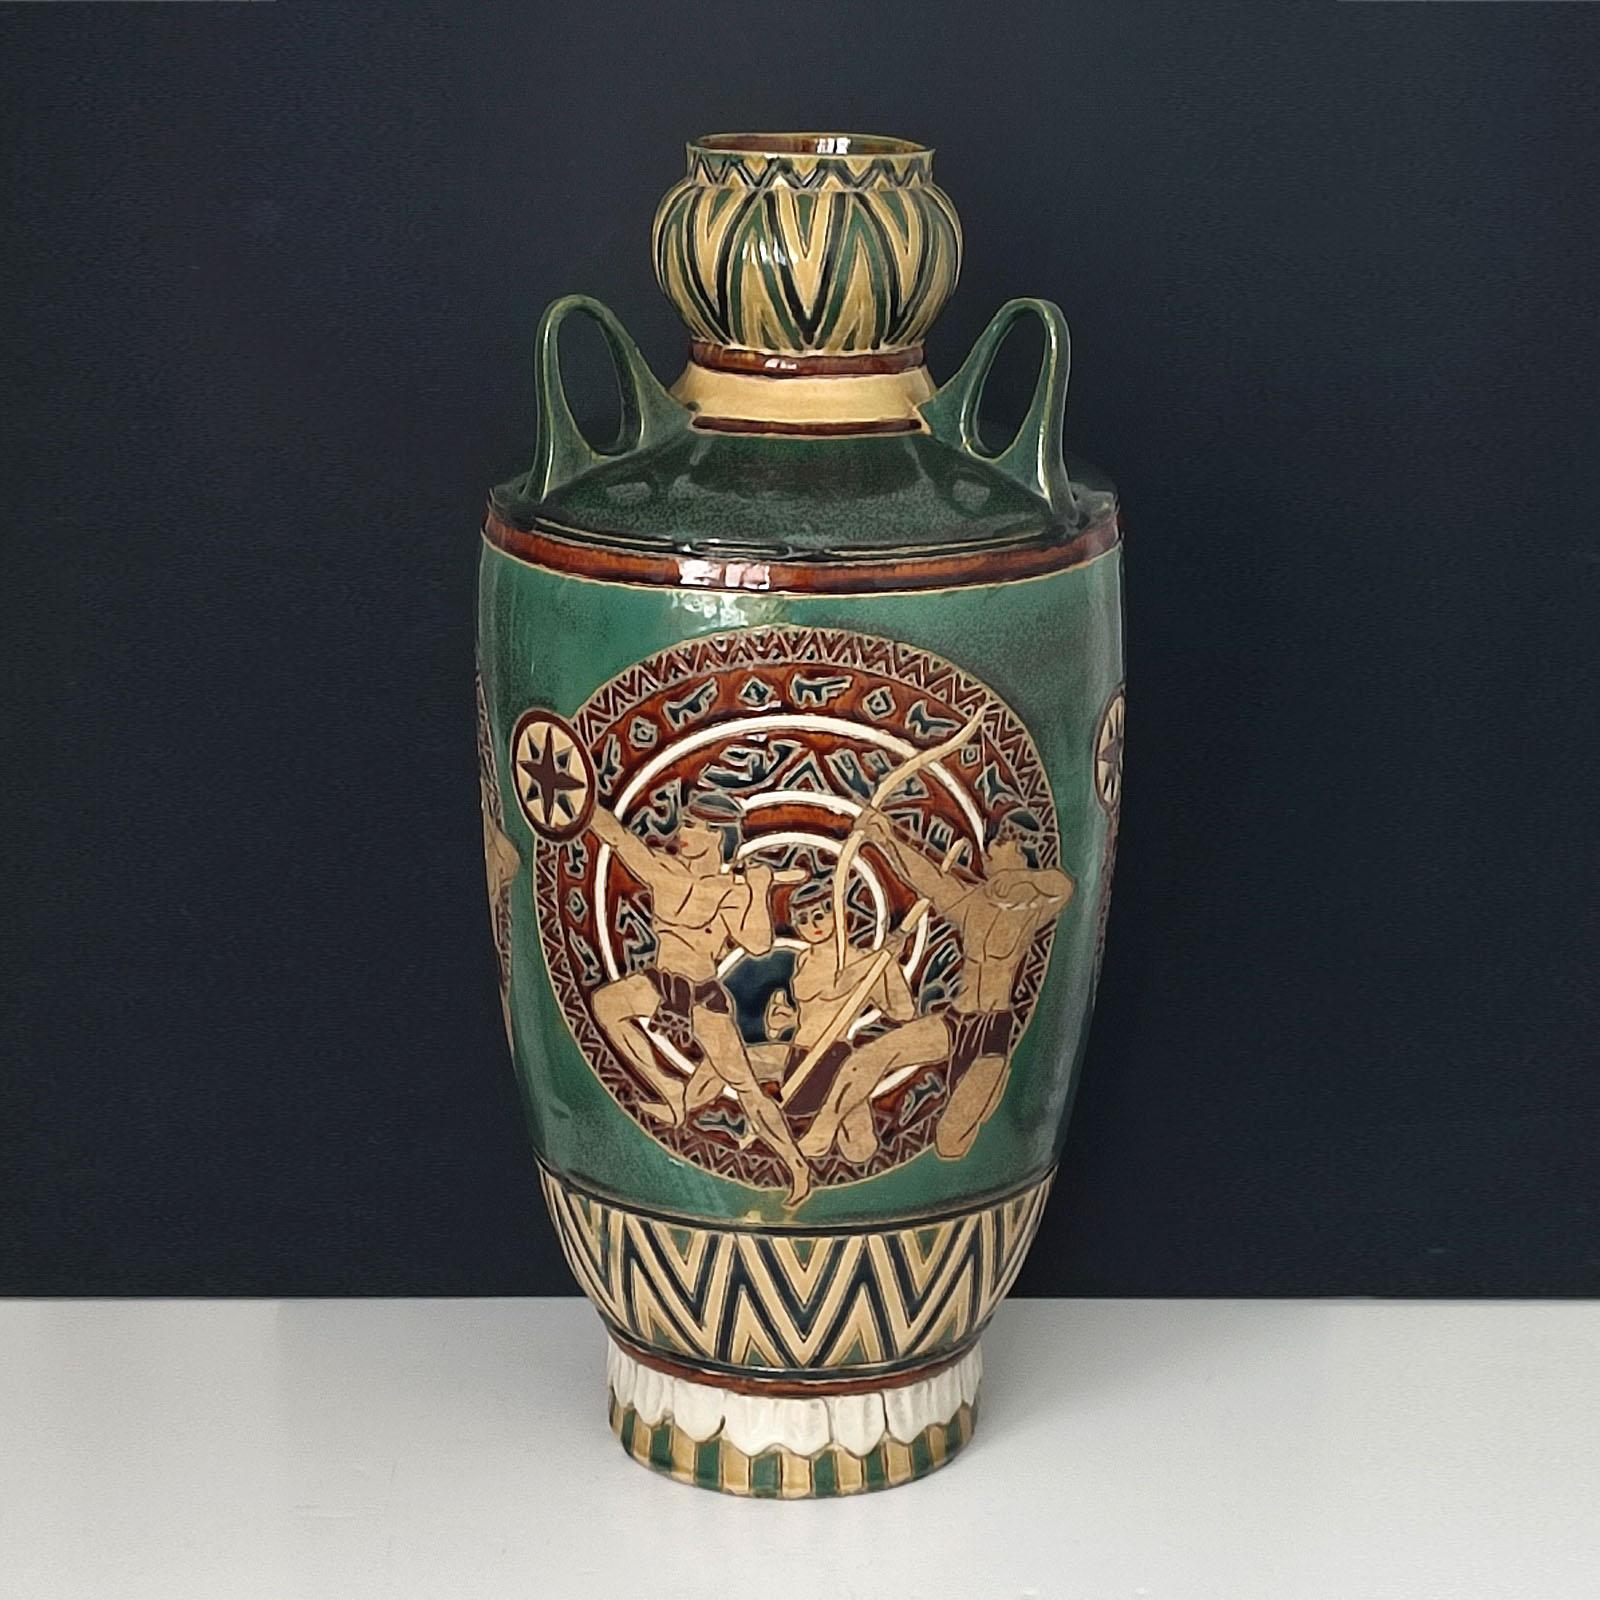 Ceramic floor vase decorated with 3 top handles and 3 round scenes with antique warriors. Designed incised and glazed. Very good vintage condition.
Measures: Height 57 cm.